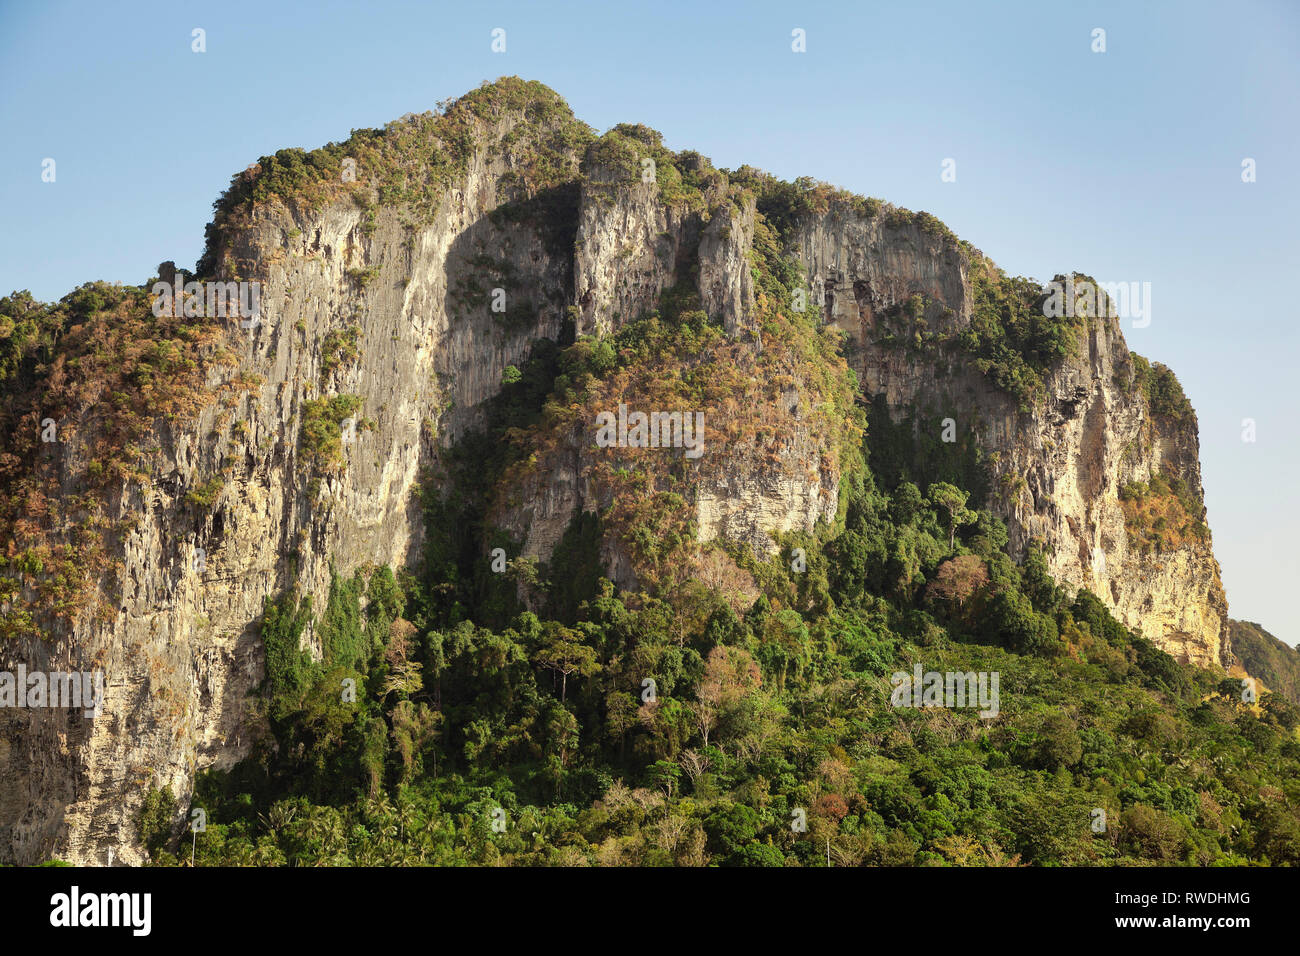 Aonang, Krabi, Thailand, karst hills with forest cover Stock Photo